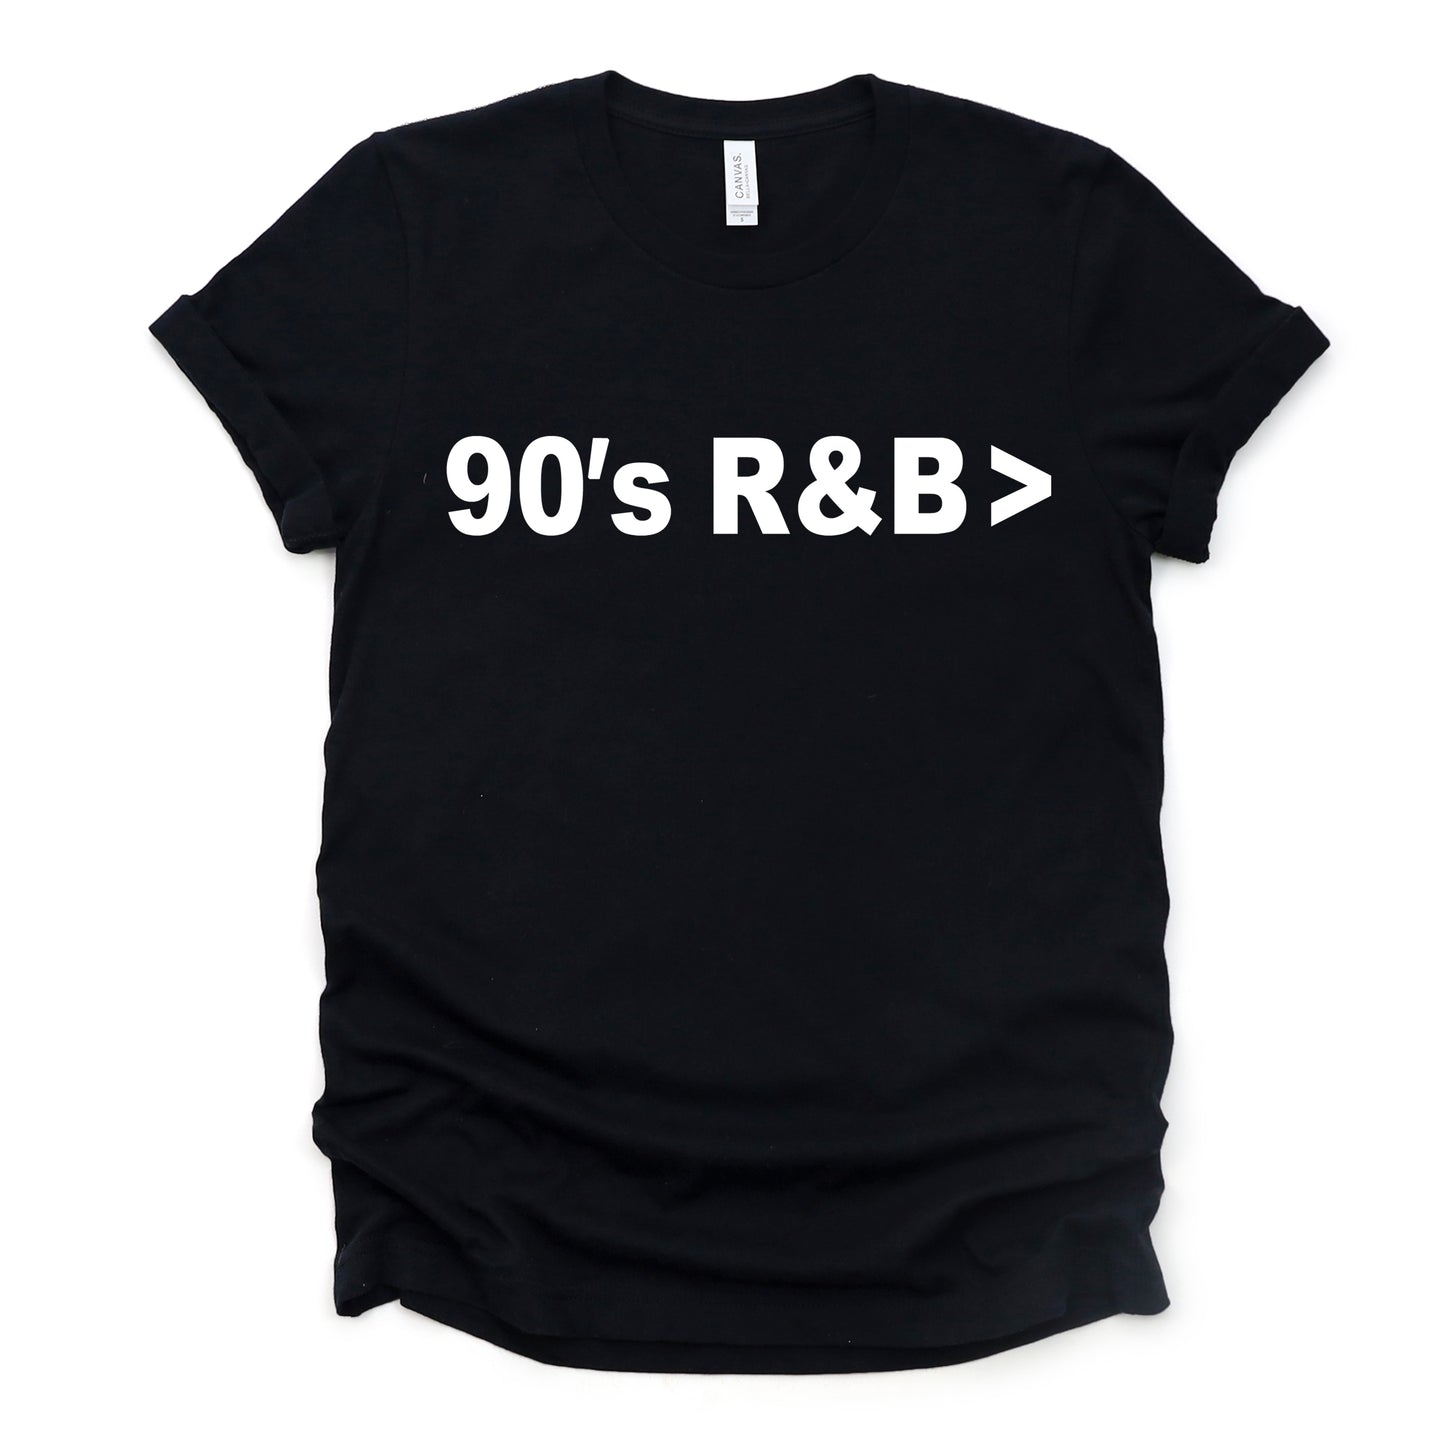 "90's R&B Is Greater" Tee